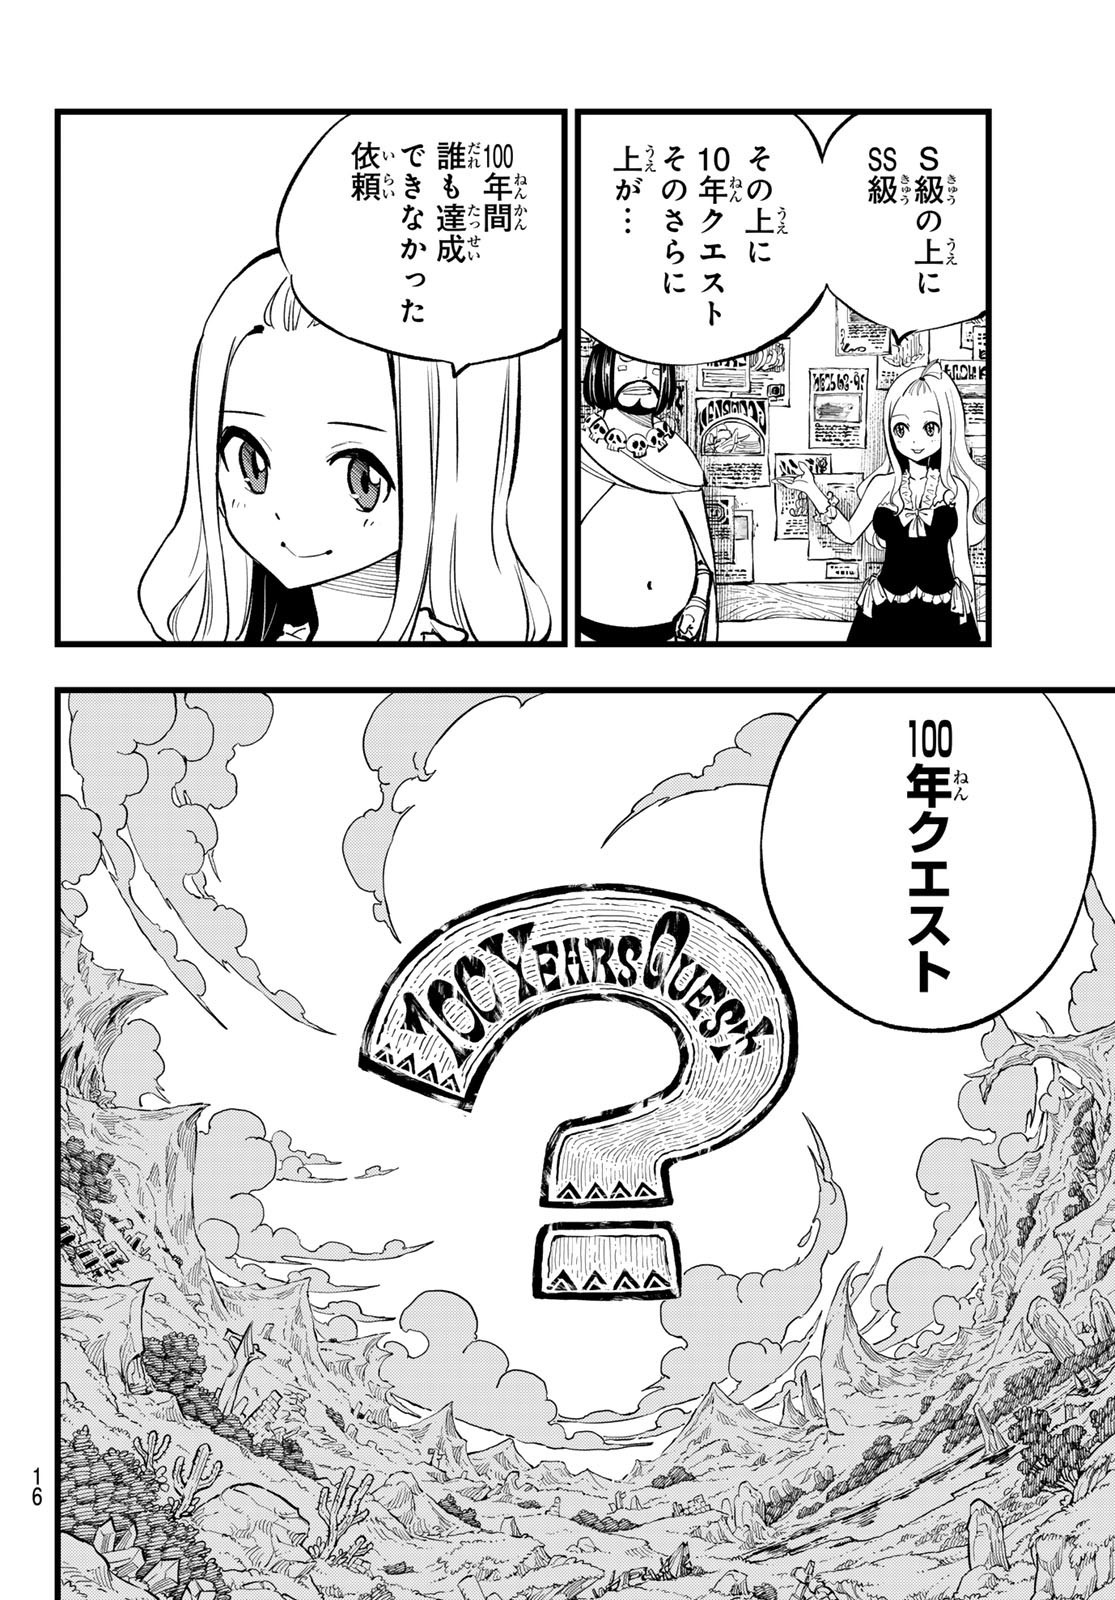 Weekly Shōnen Magazine - 週刊少年マガジン - Chapter 2024-31 - Page 15